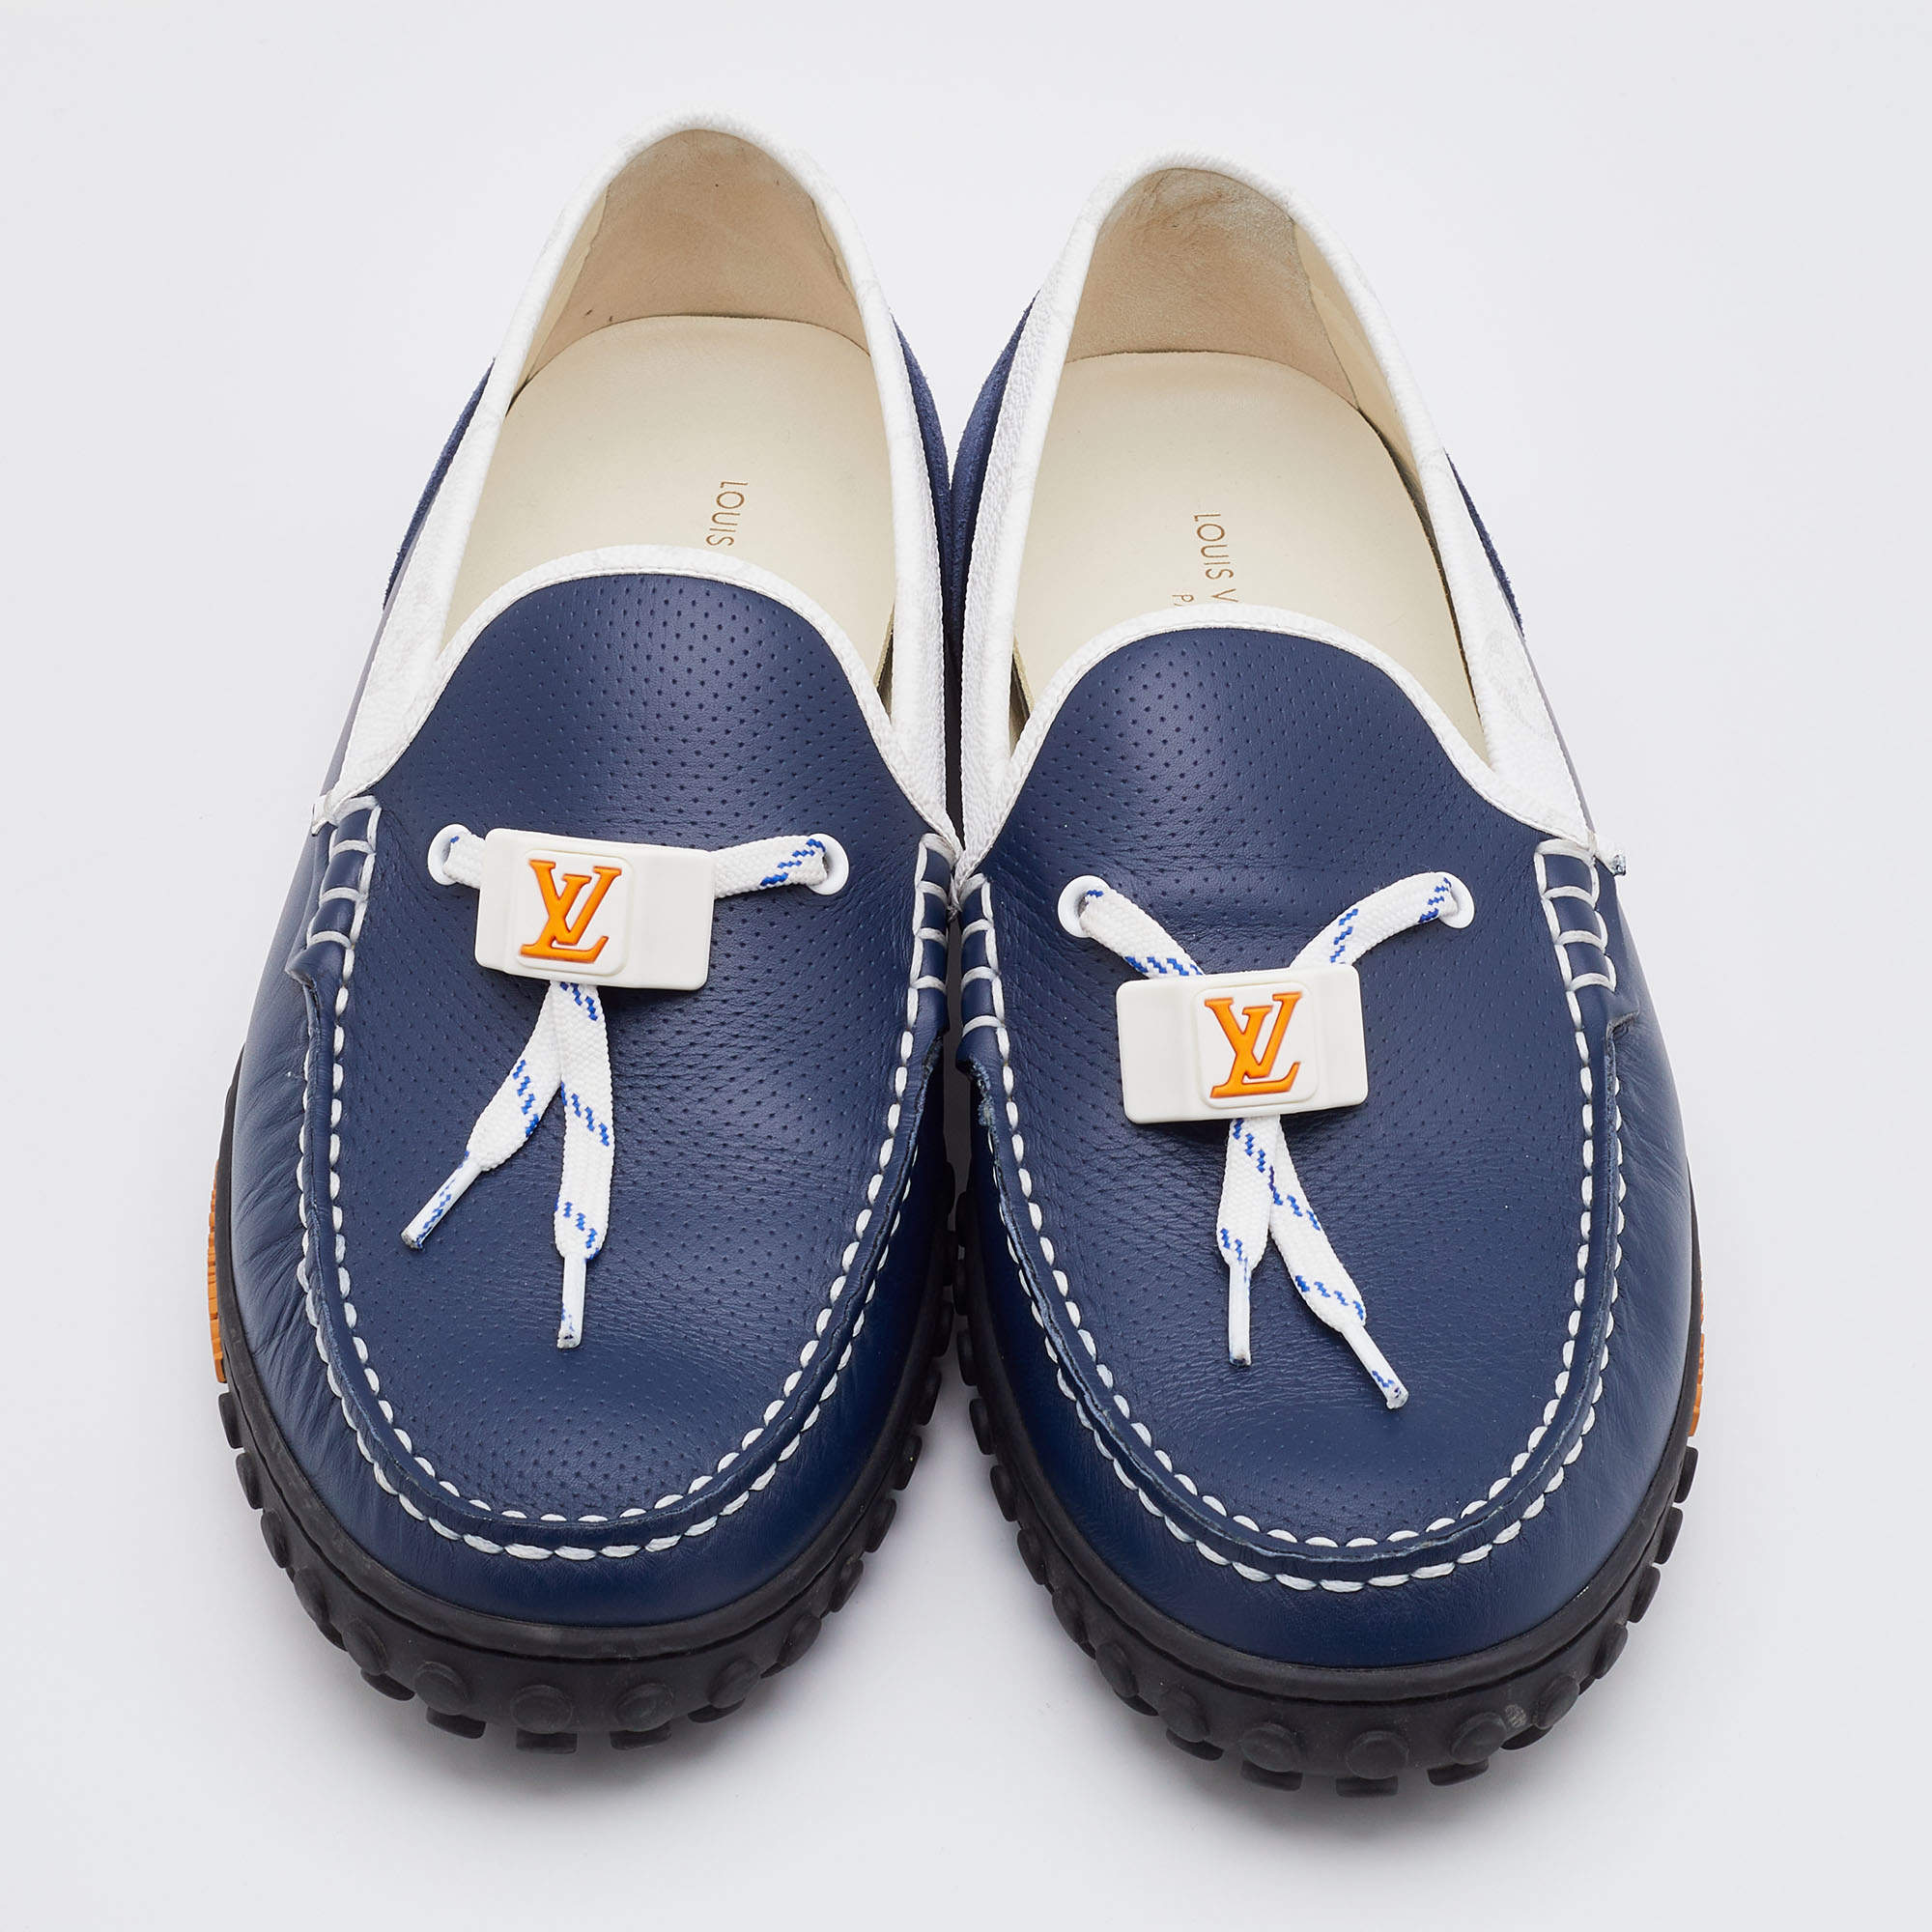 Louis Vuitton Blue/White Suede and Leather Racer Loafers Size 42